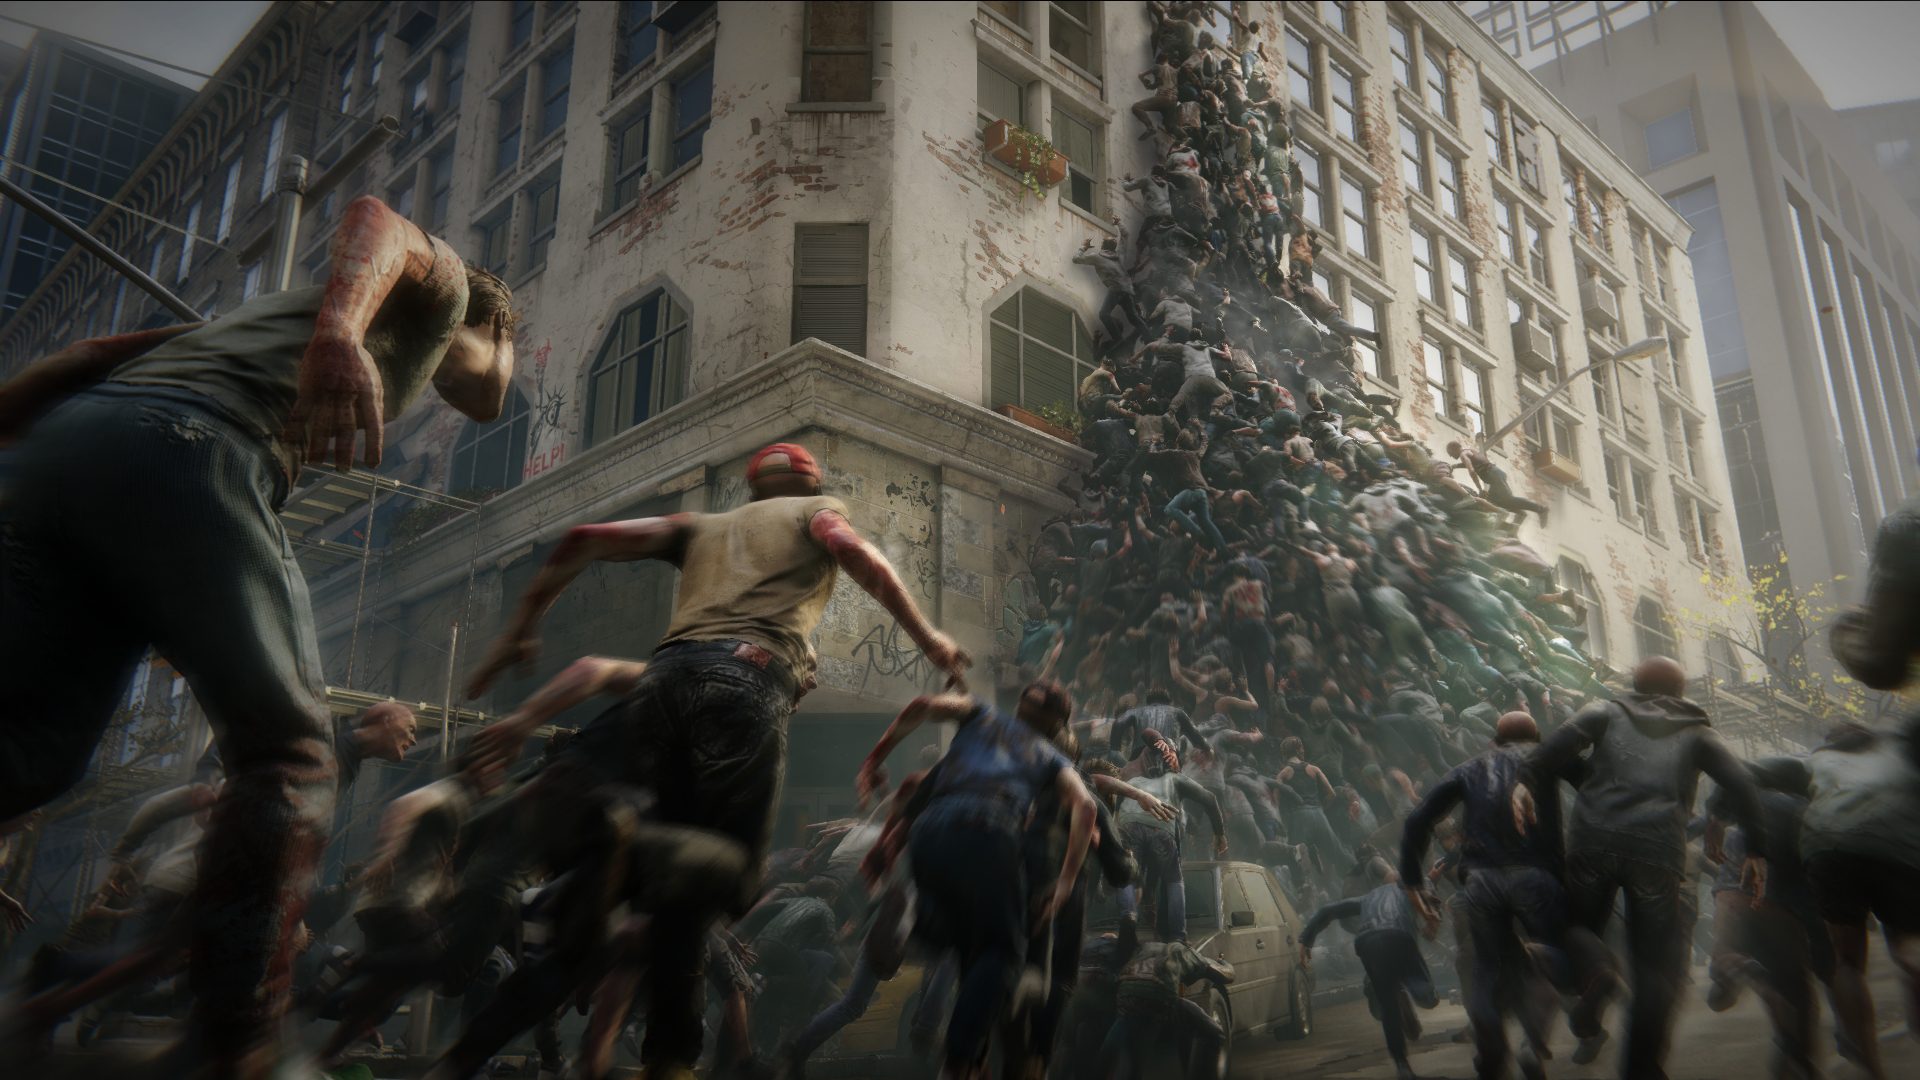 World War Z sells over 1 million units in first week of launch